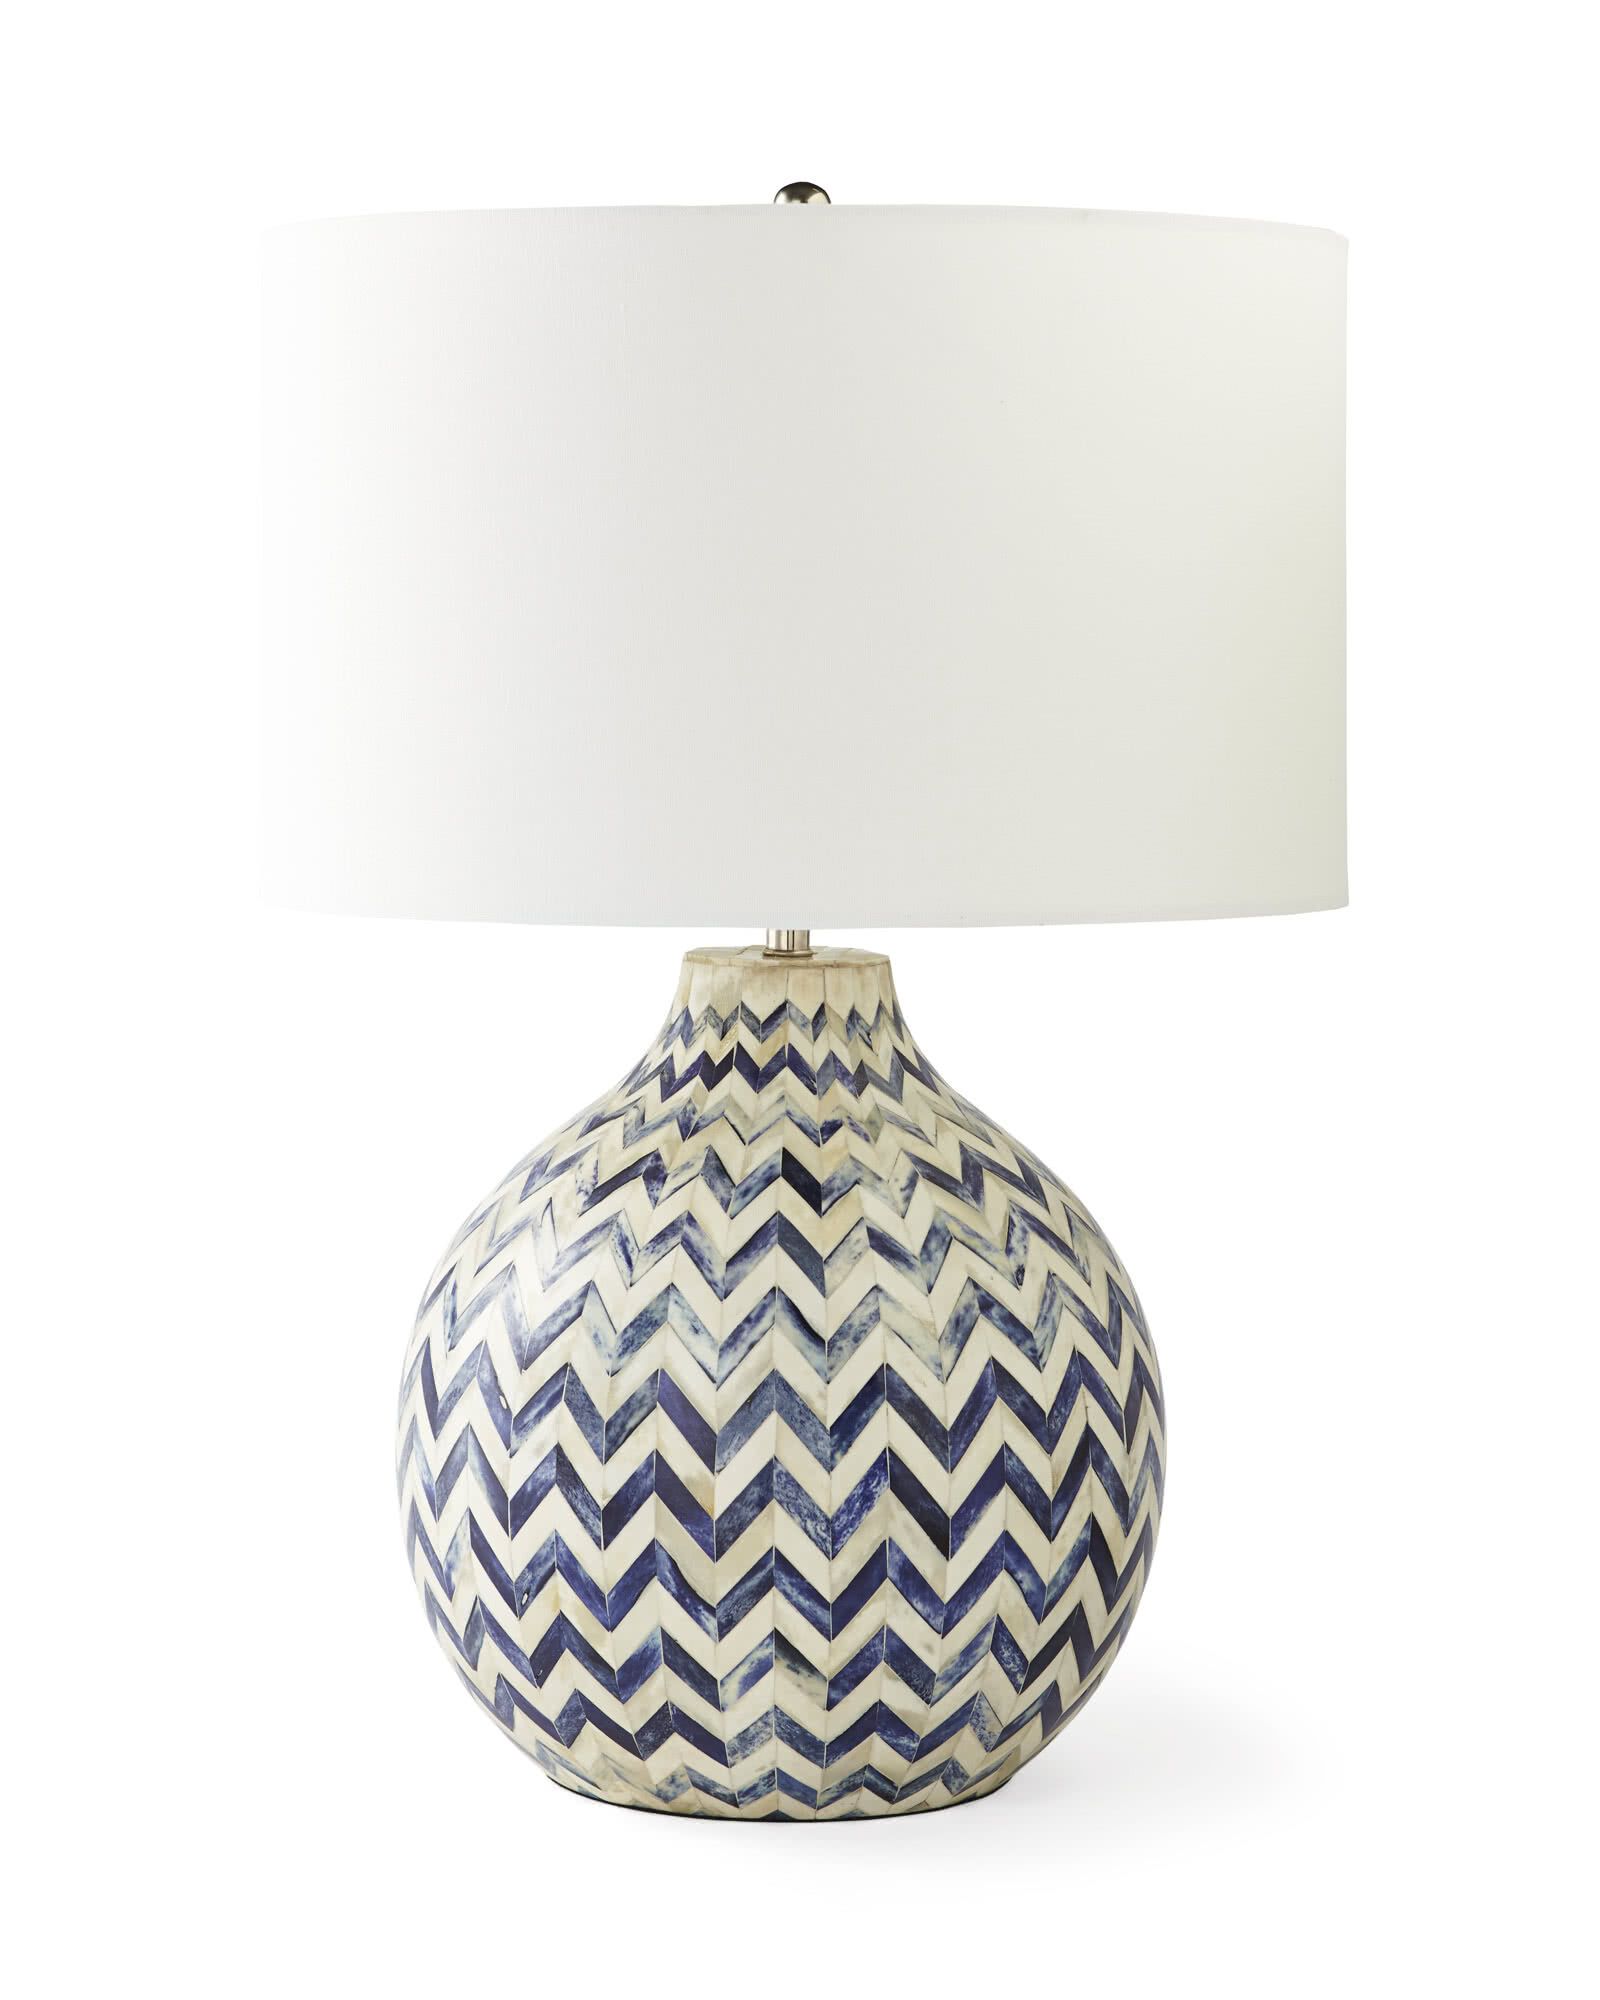 Favorite Table Lamps- serena & lily - blue and white - blue and white lamp - home decor - home design - interior decor